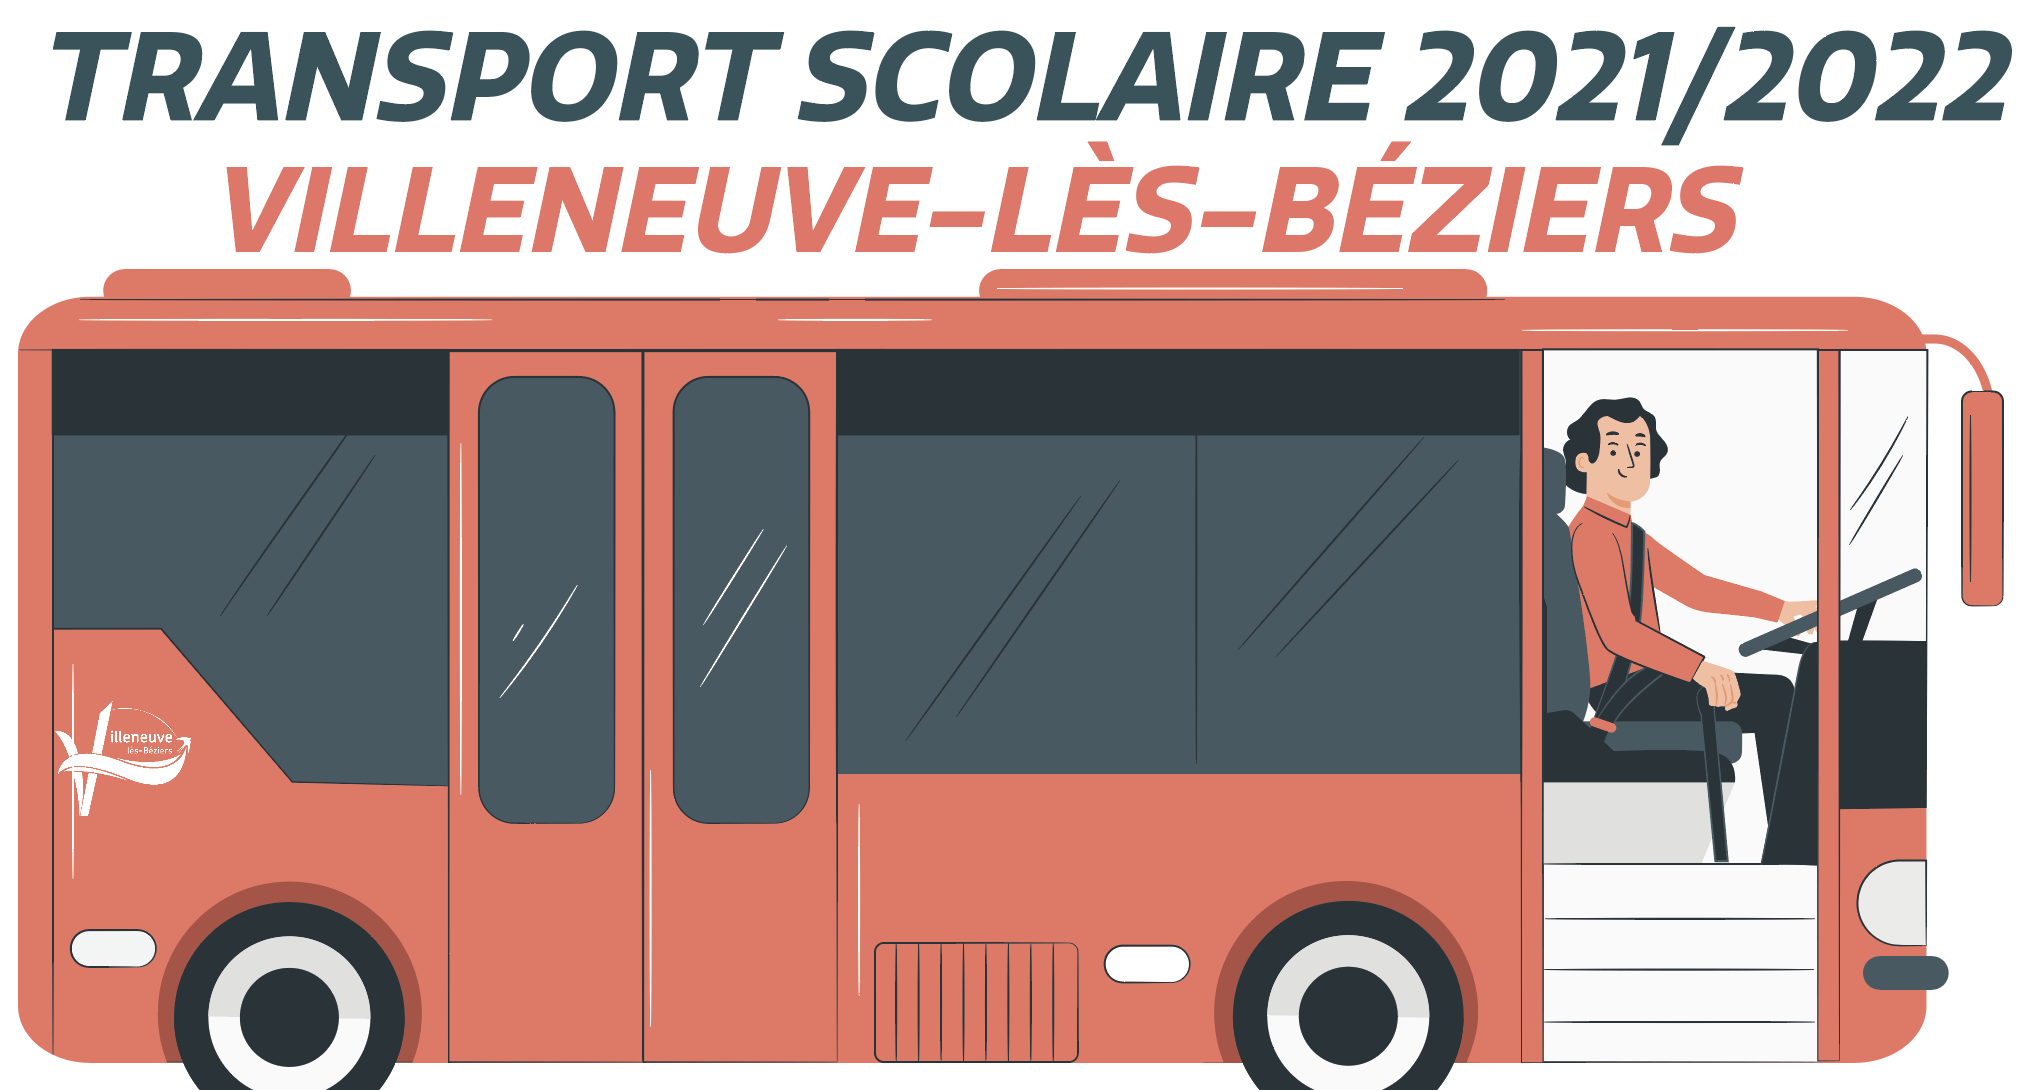 You are currently viewing Transport scolaire 2021/2022